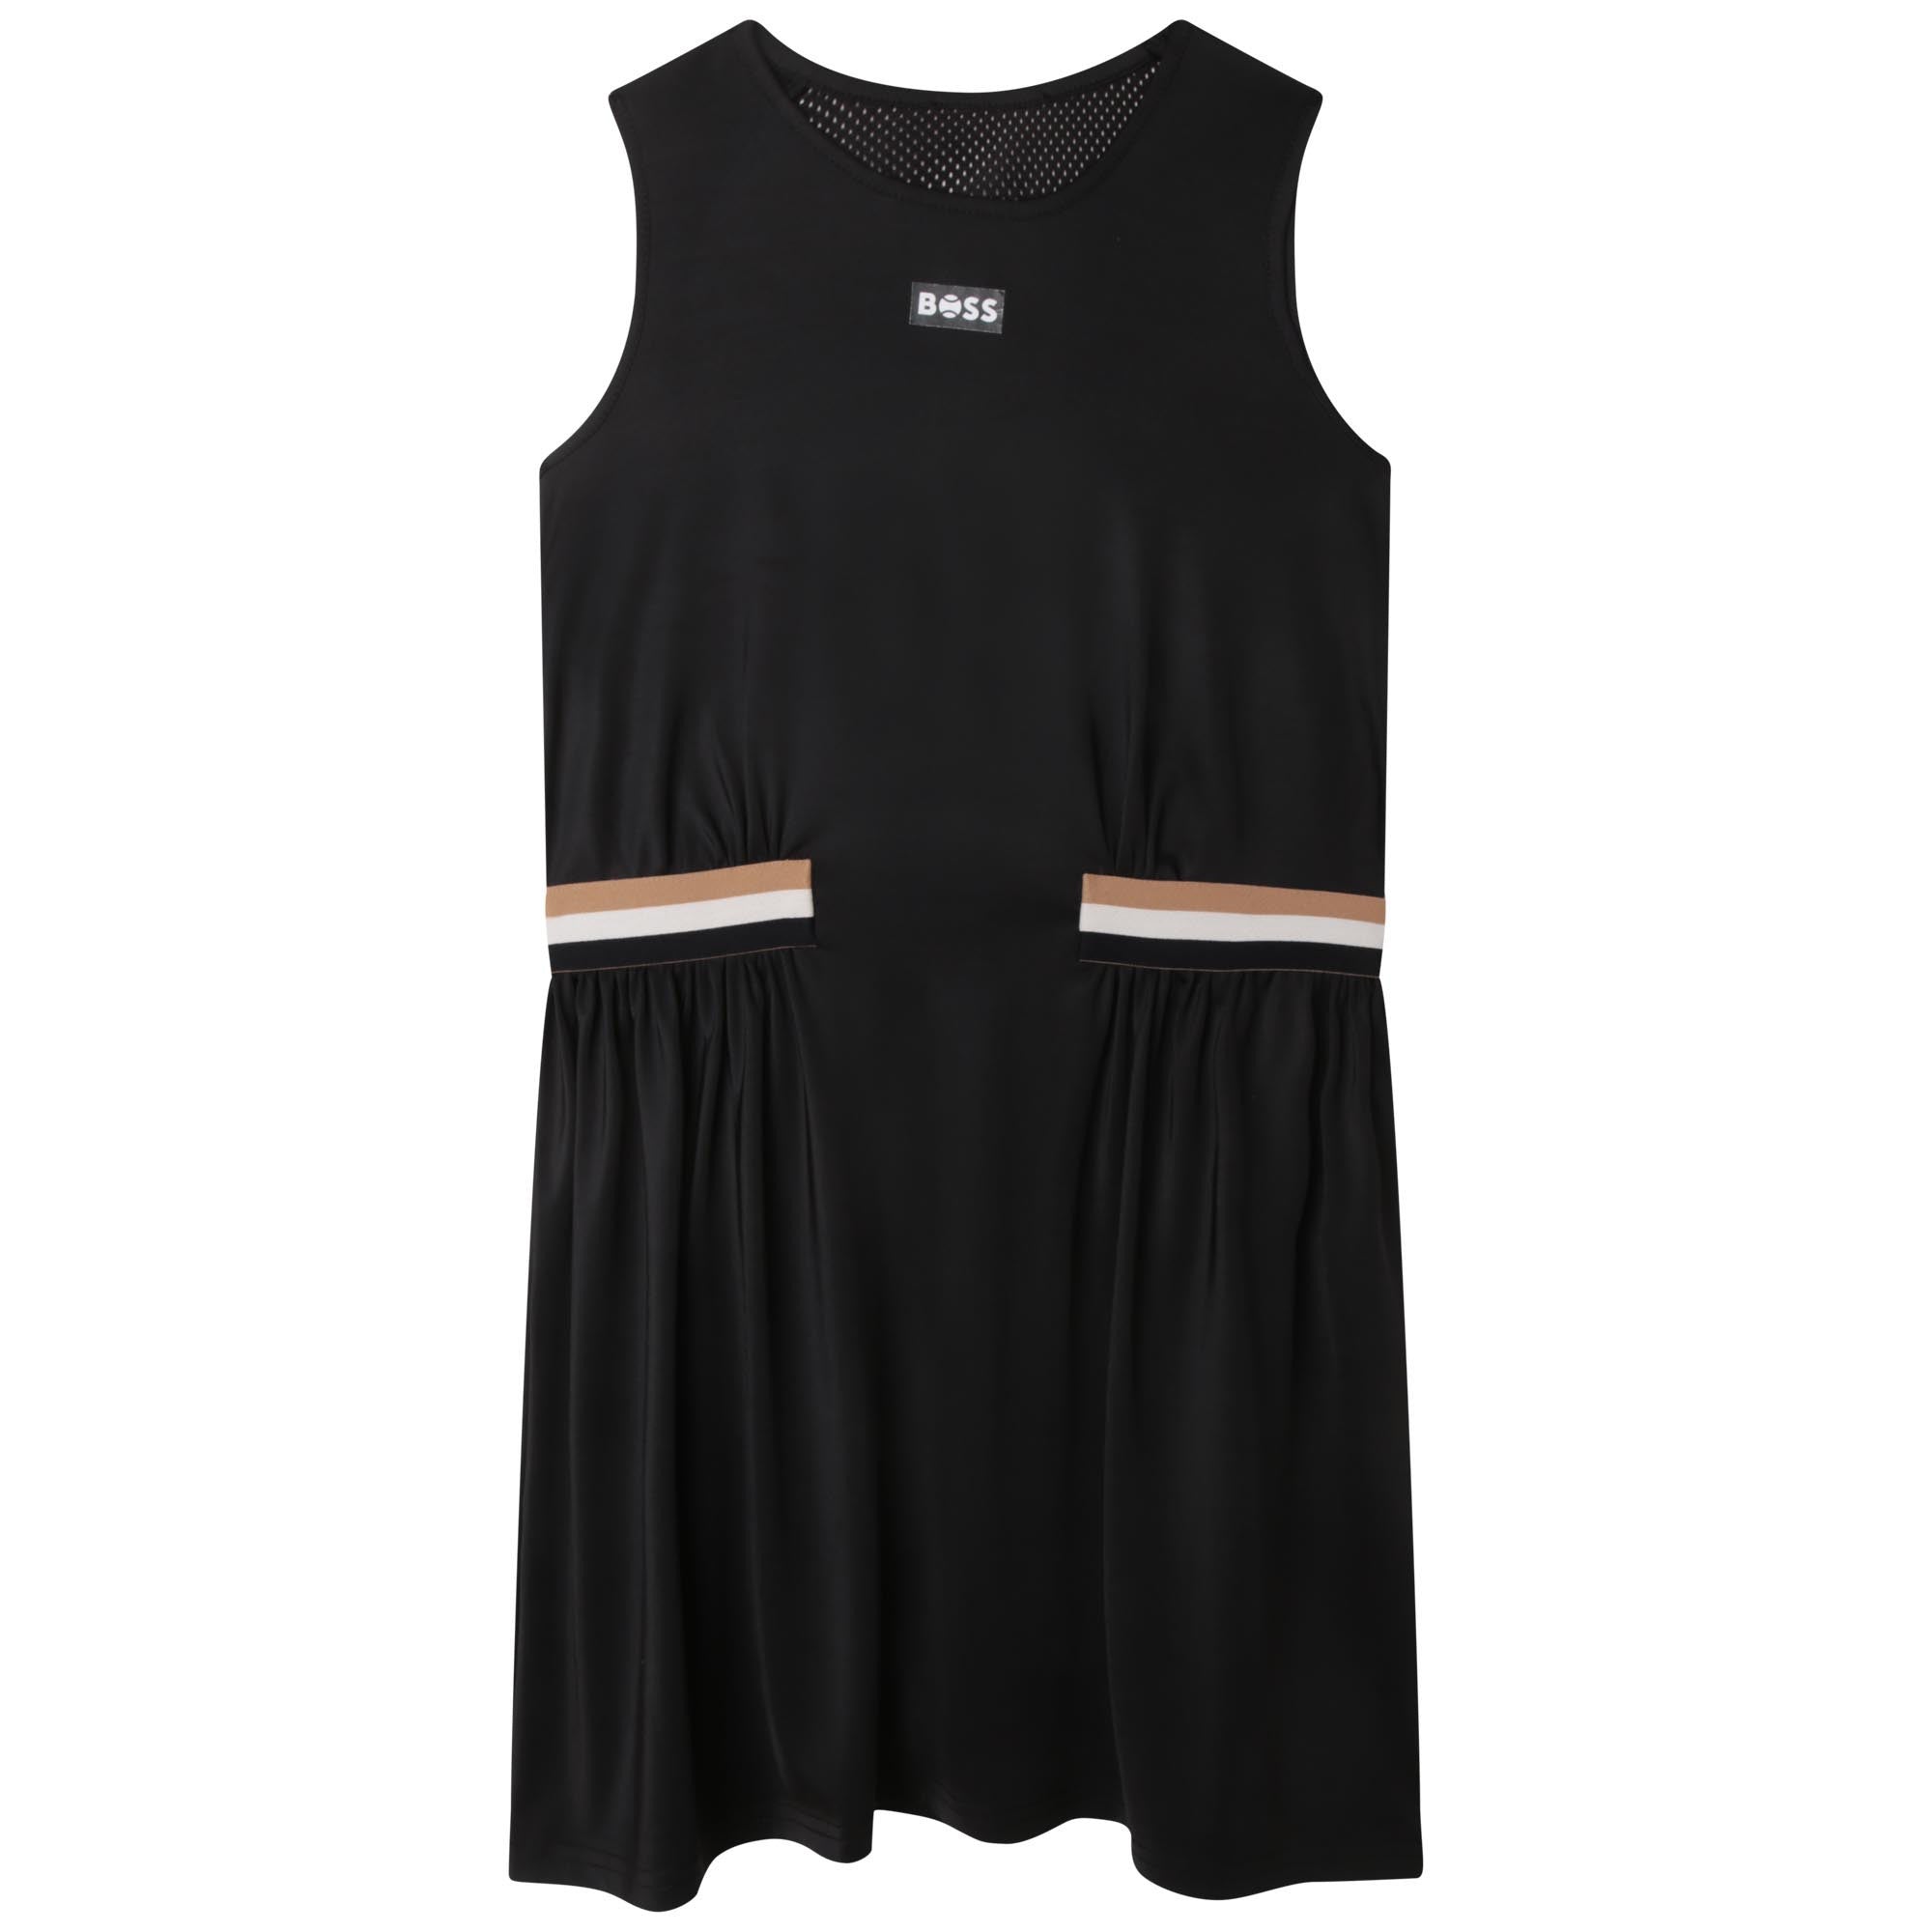 Sleeveless black dress for girls in stretch fabric with signature- stripe details and a logo accent by Boss.